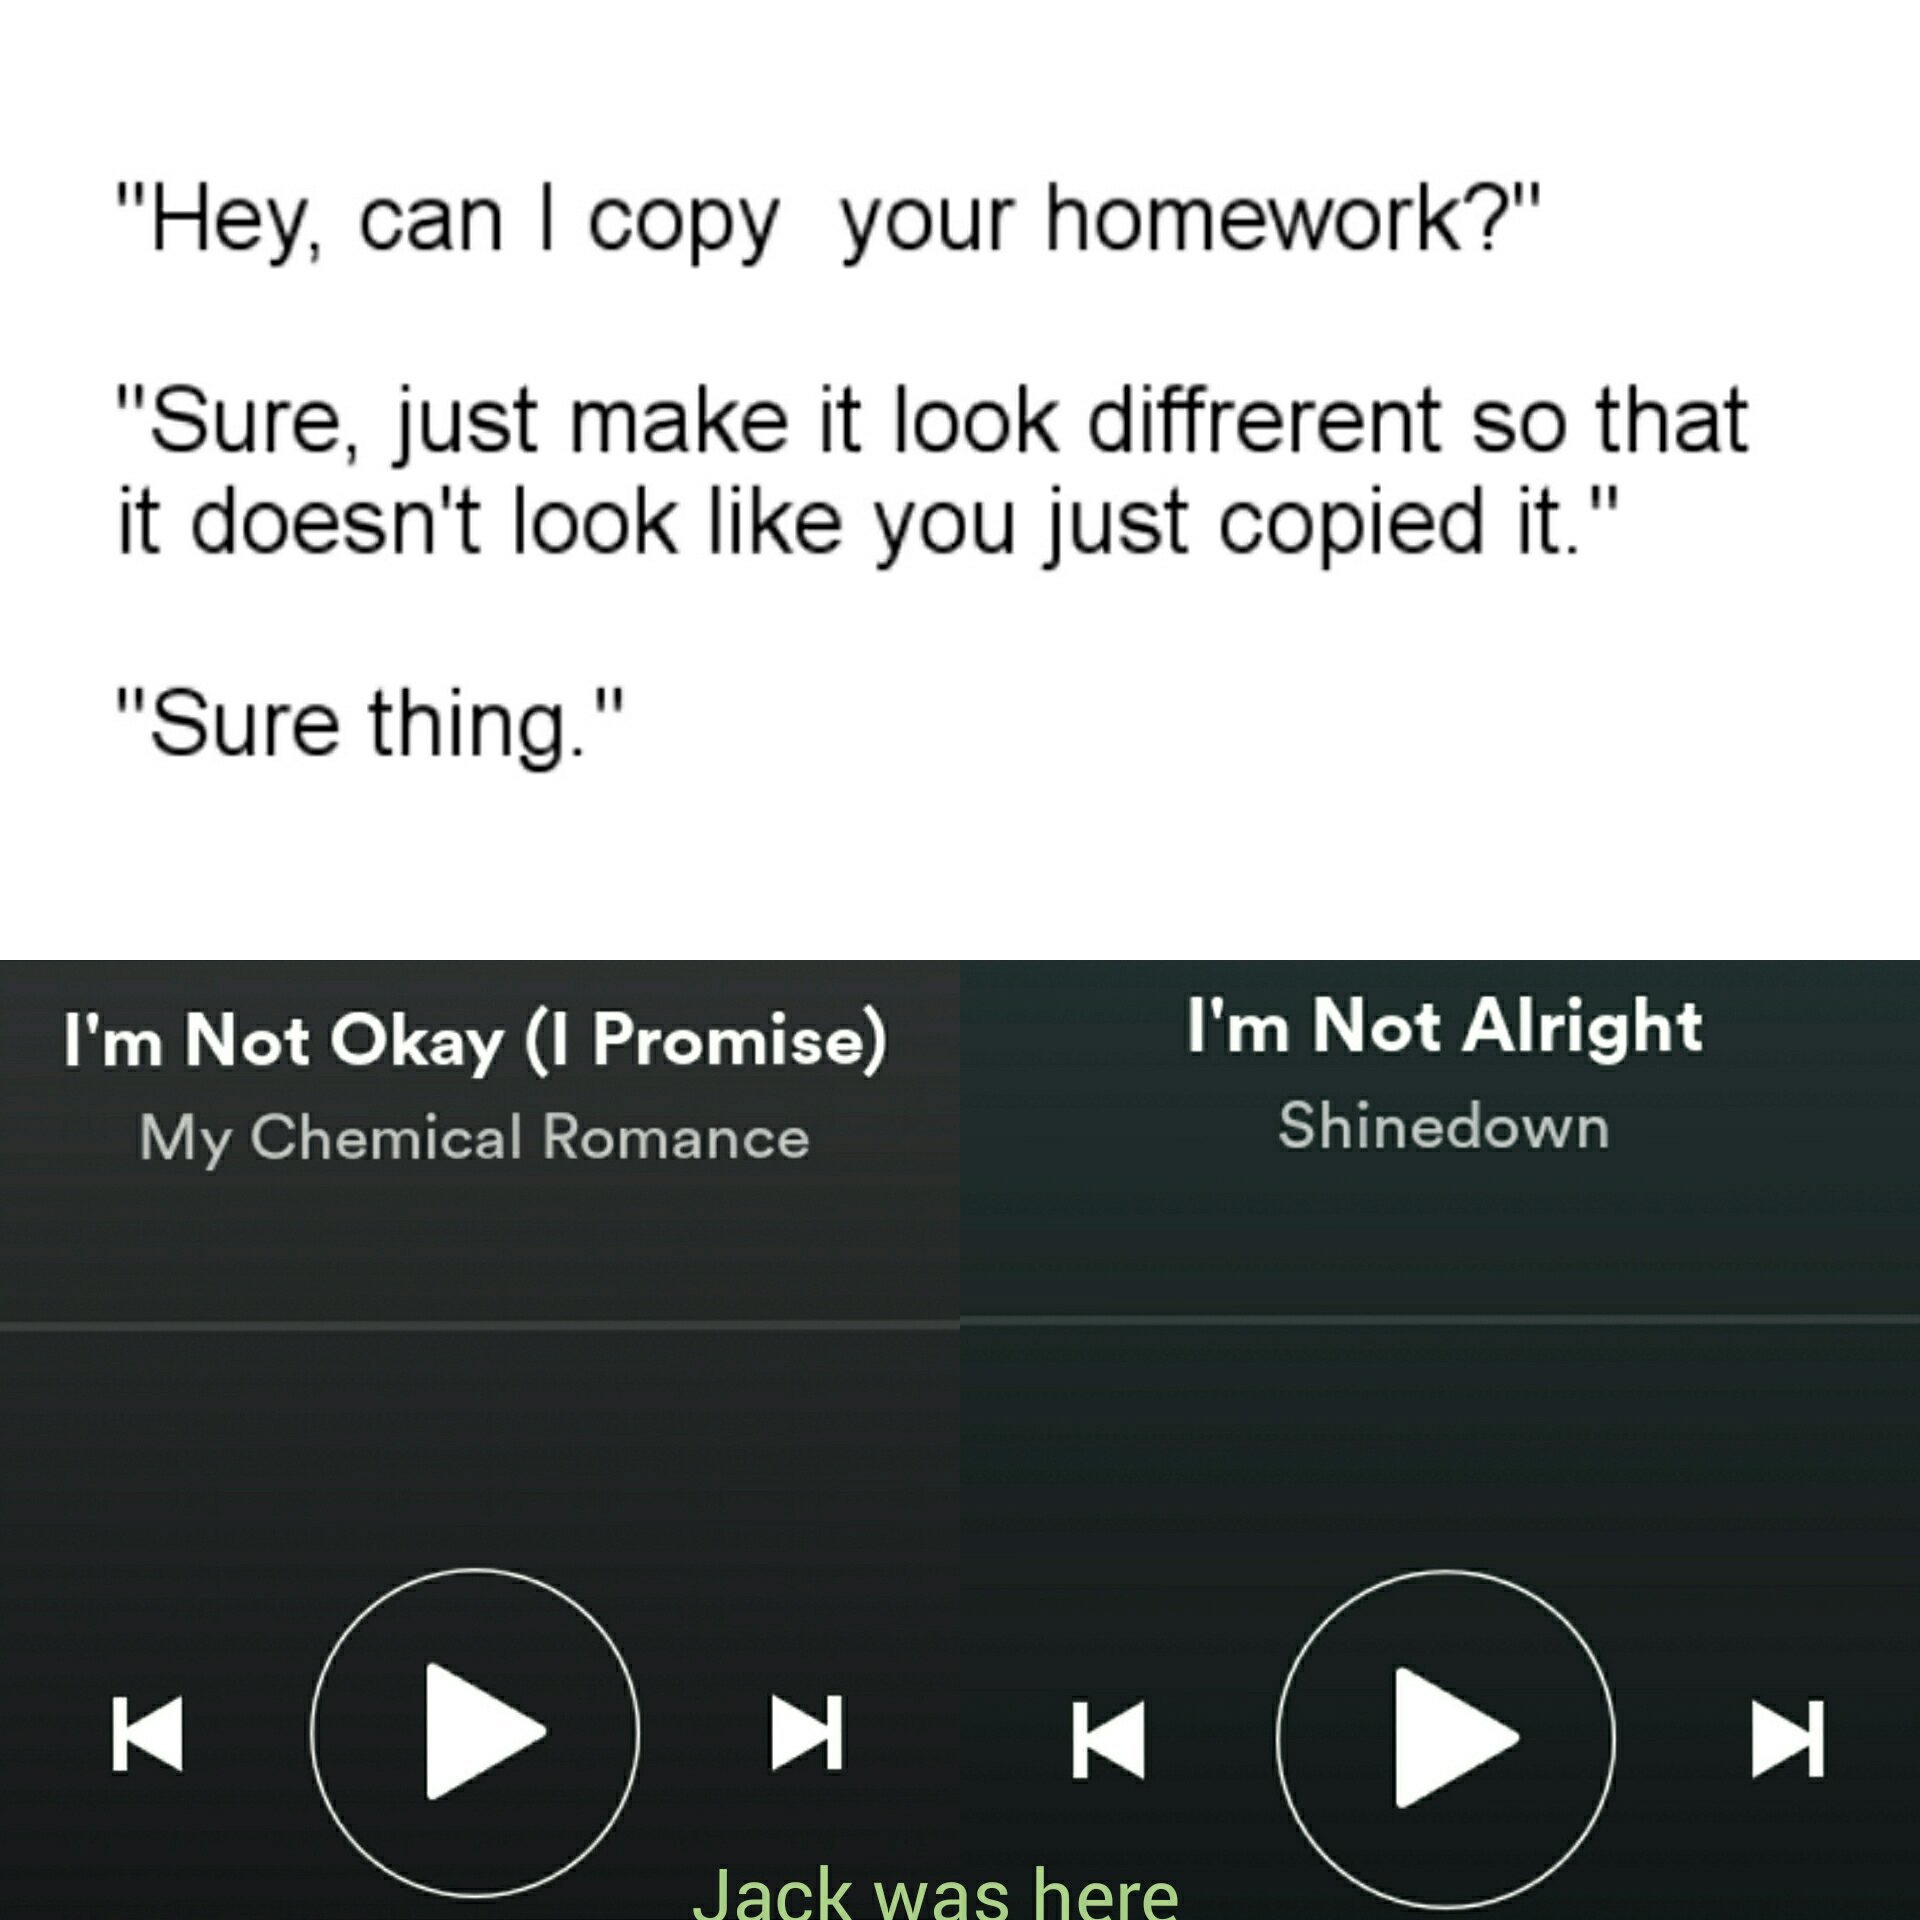 "But Jack, those songs don't sound similar" It's just a meme, I don't care